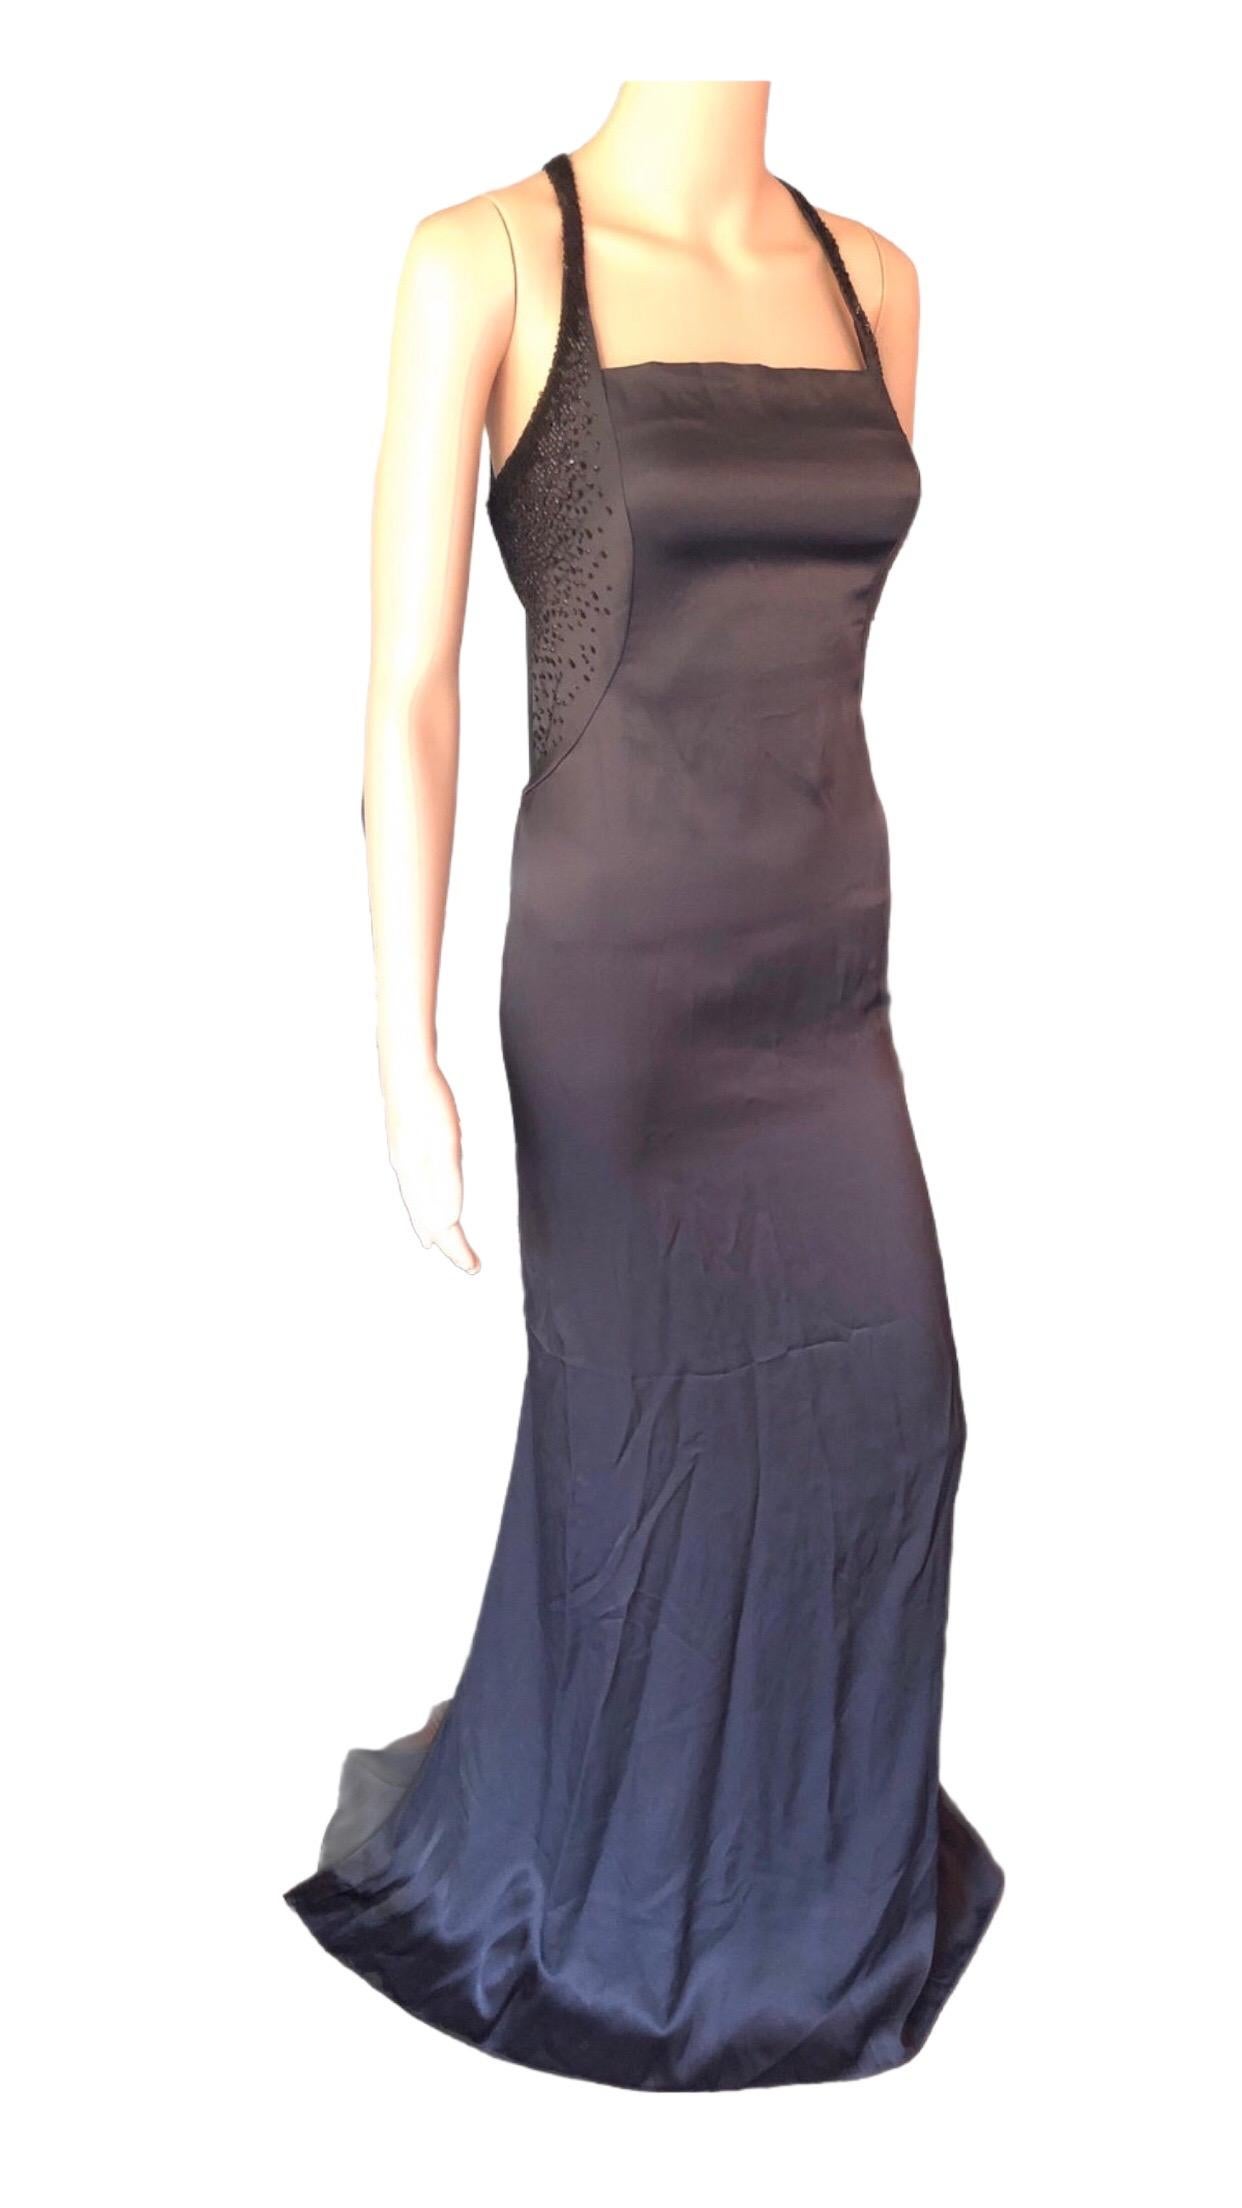 Tom Ford for Gucci c. 2001 Cutout Back Embellished Brown Evening Dress Gown For Sale 10